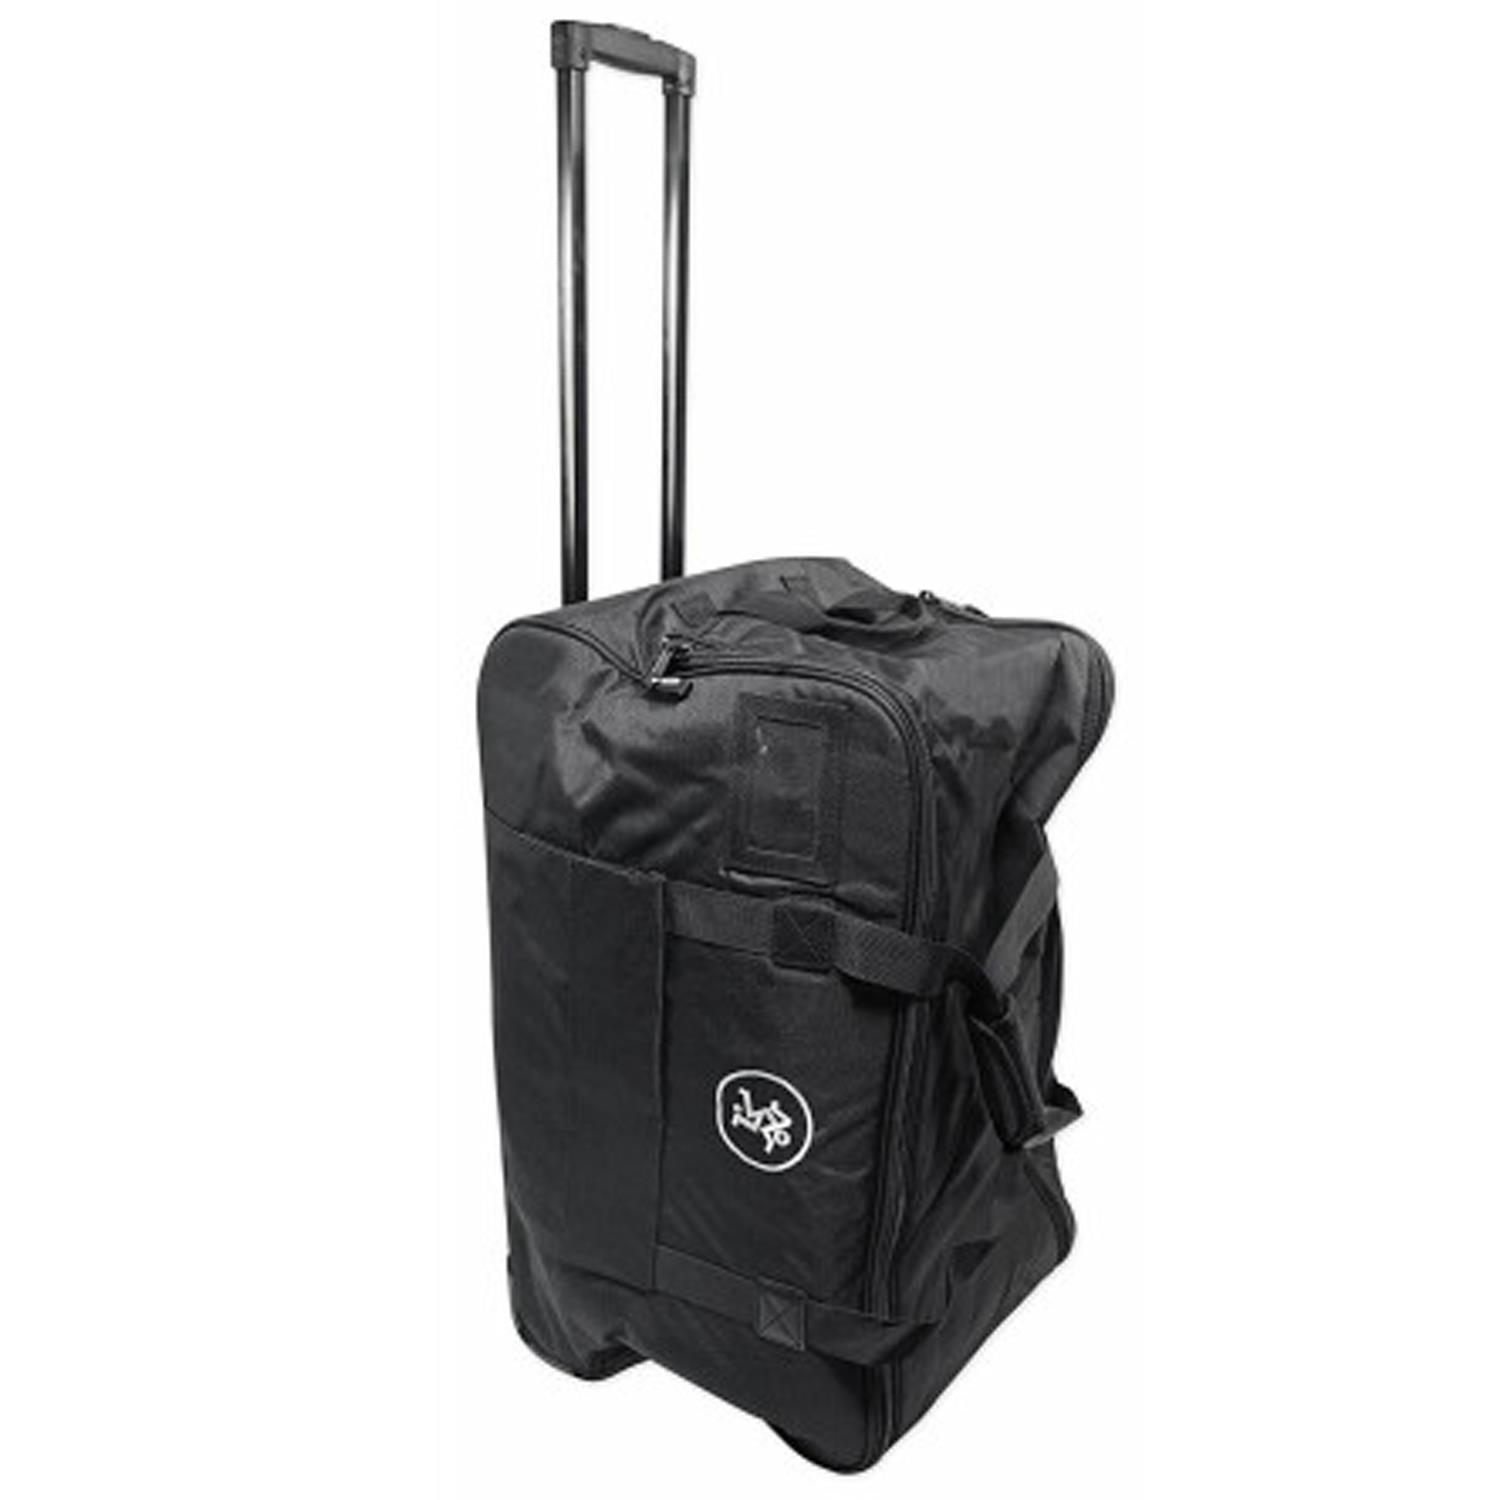 Mackie Padded Rolling Carry Bag for Thump 12" Models Thump212, Thump212XT, Thump12A, Thump12BST - DY Pro Audio